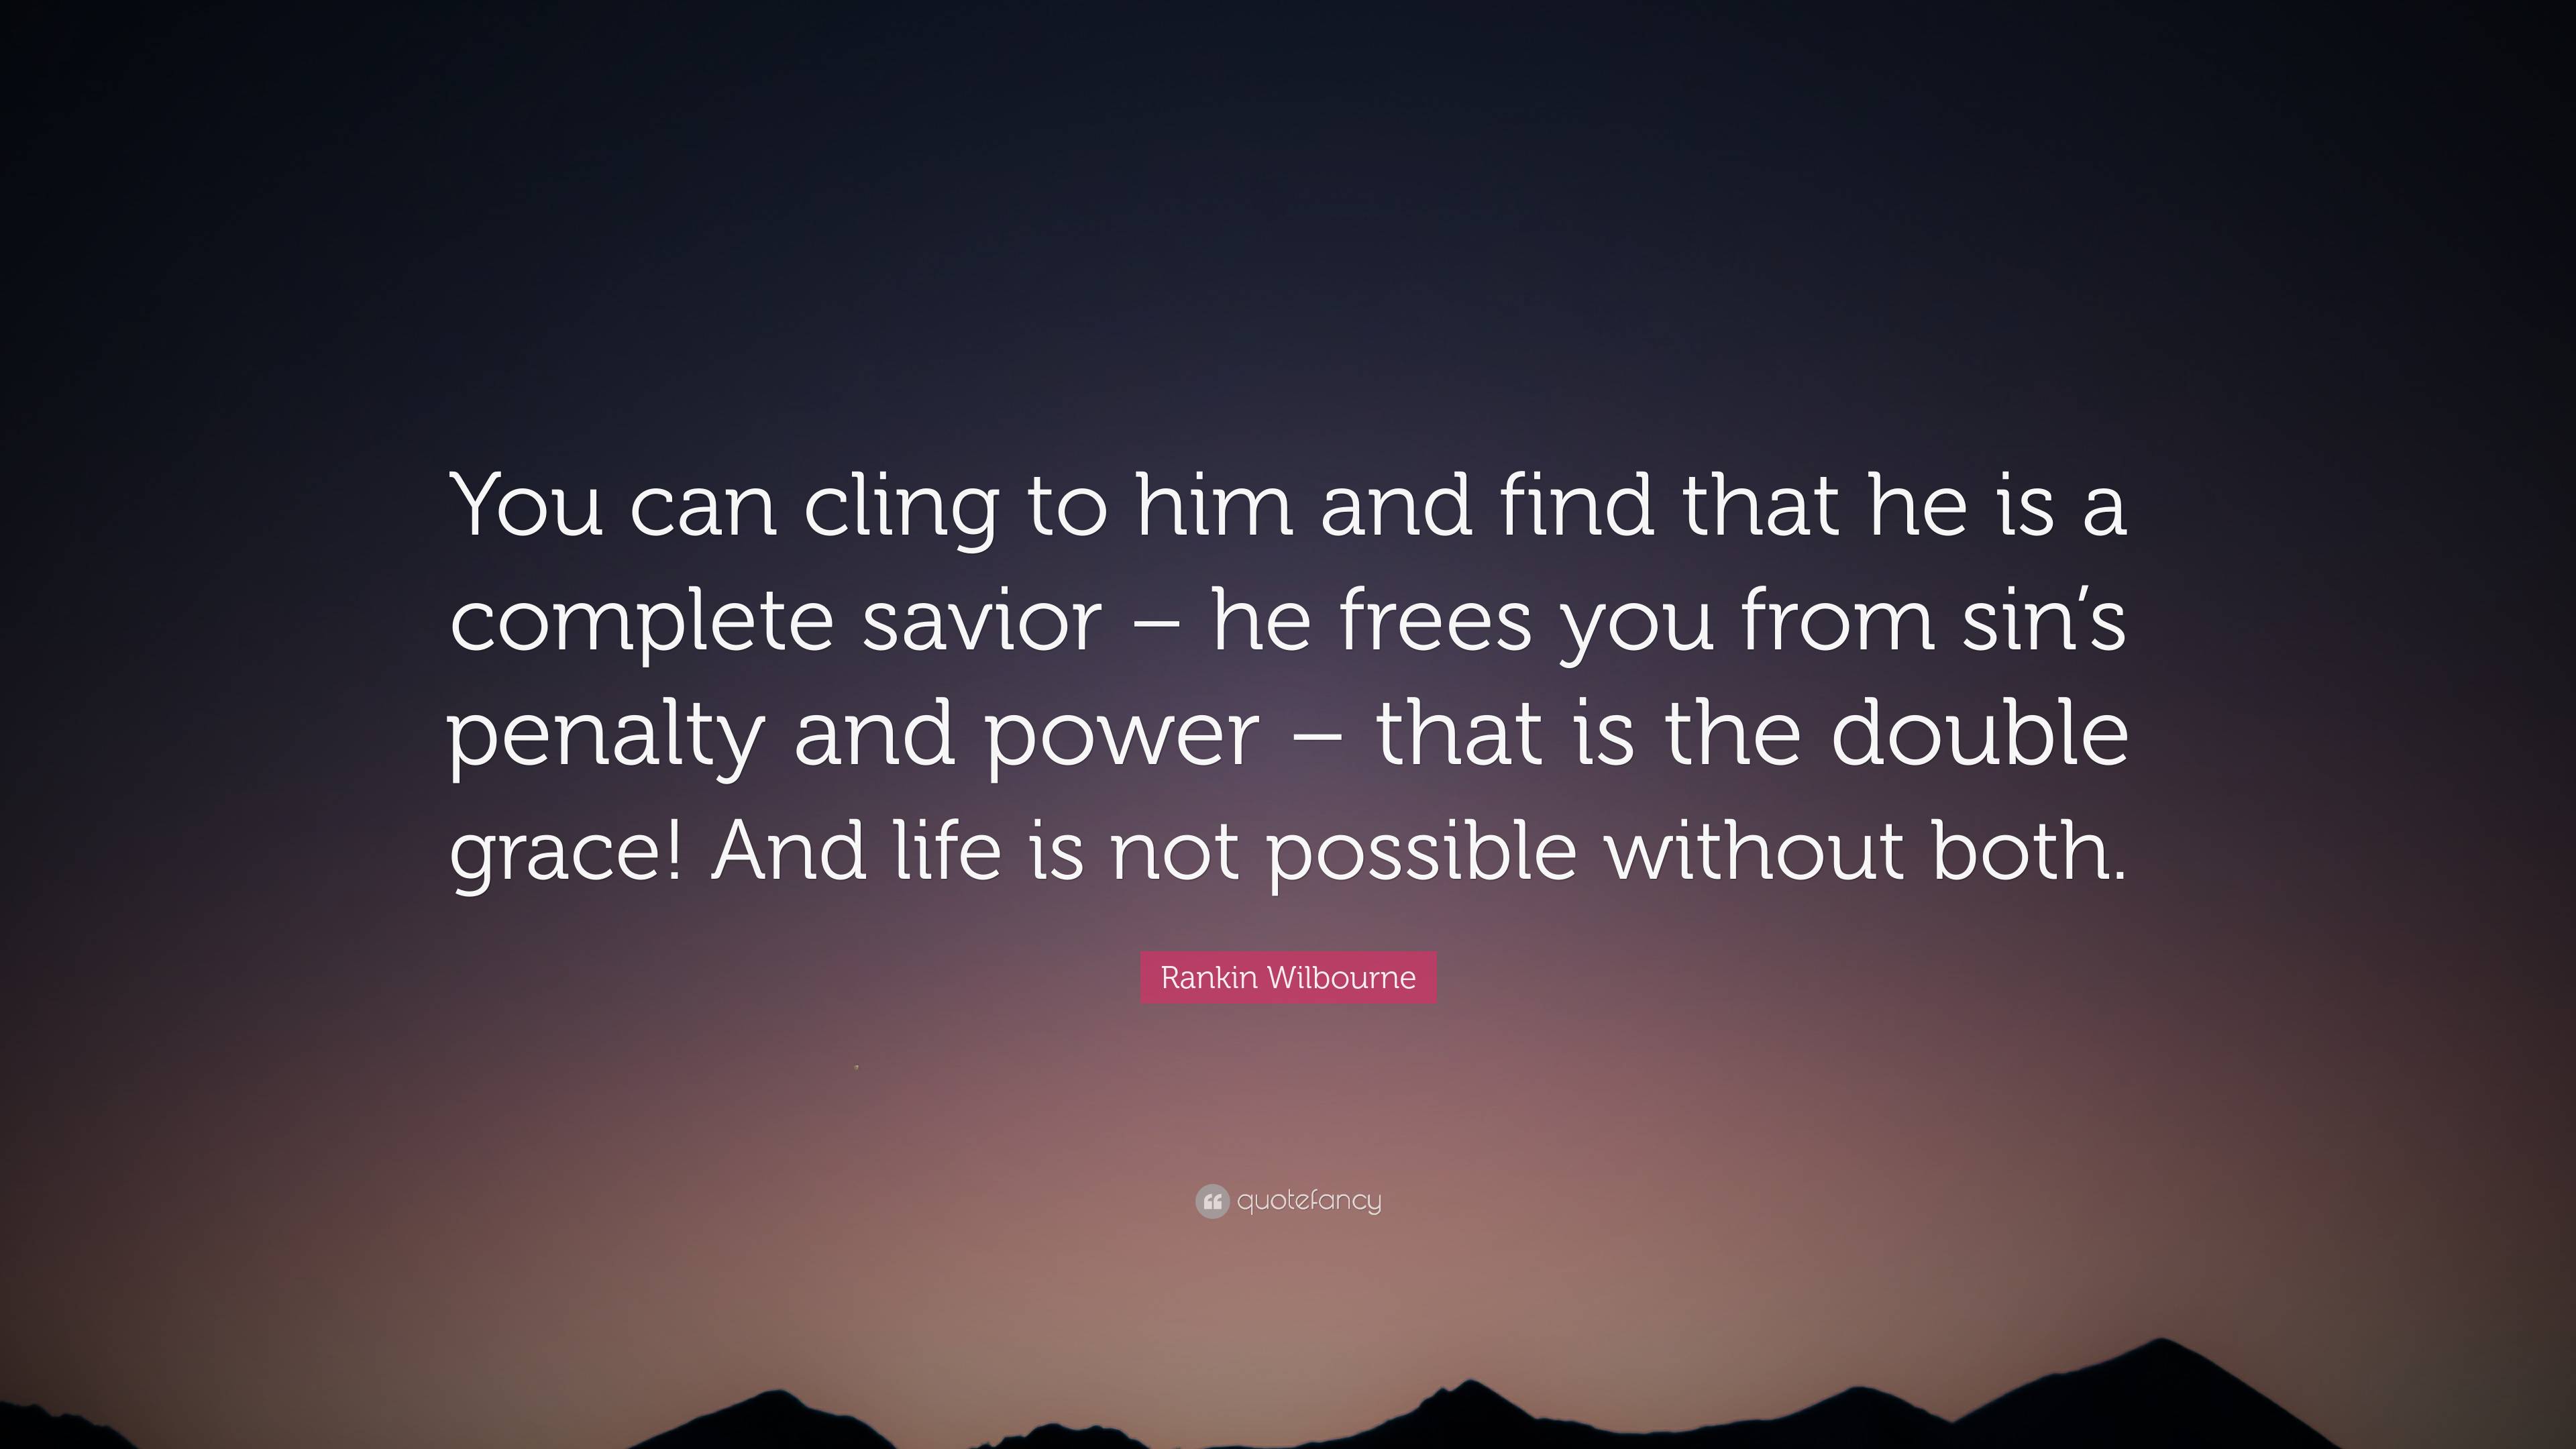 Rankin Wilbourne Quote: “You can cling to him and find that he is a ...